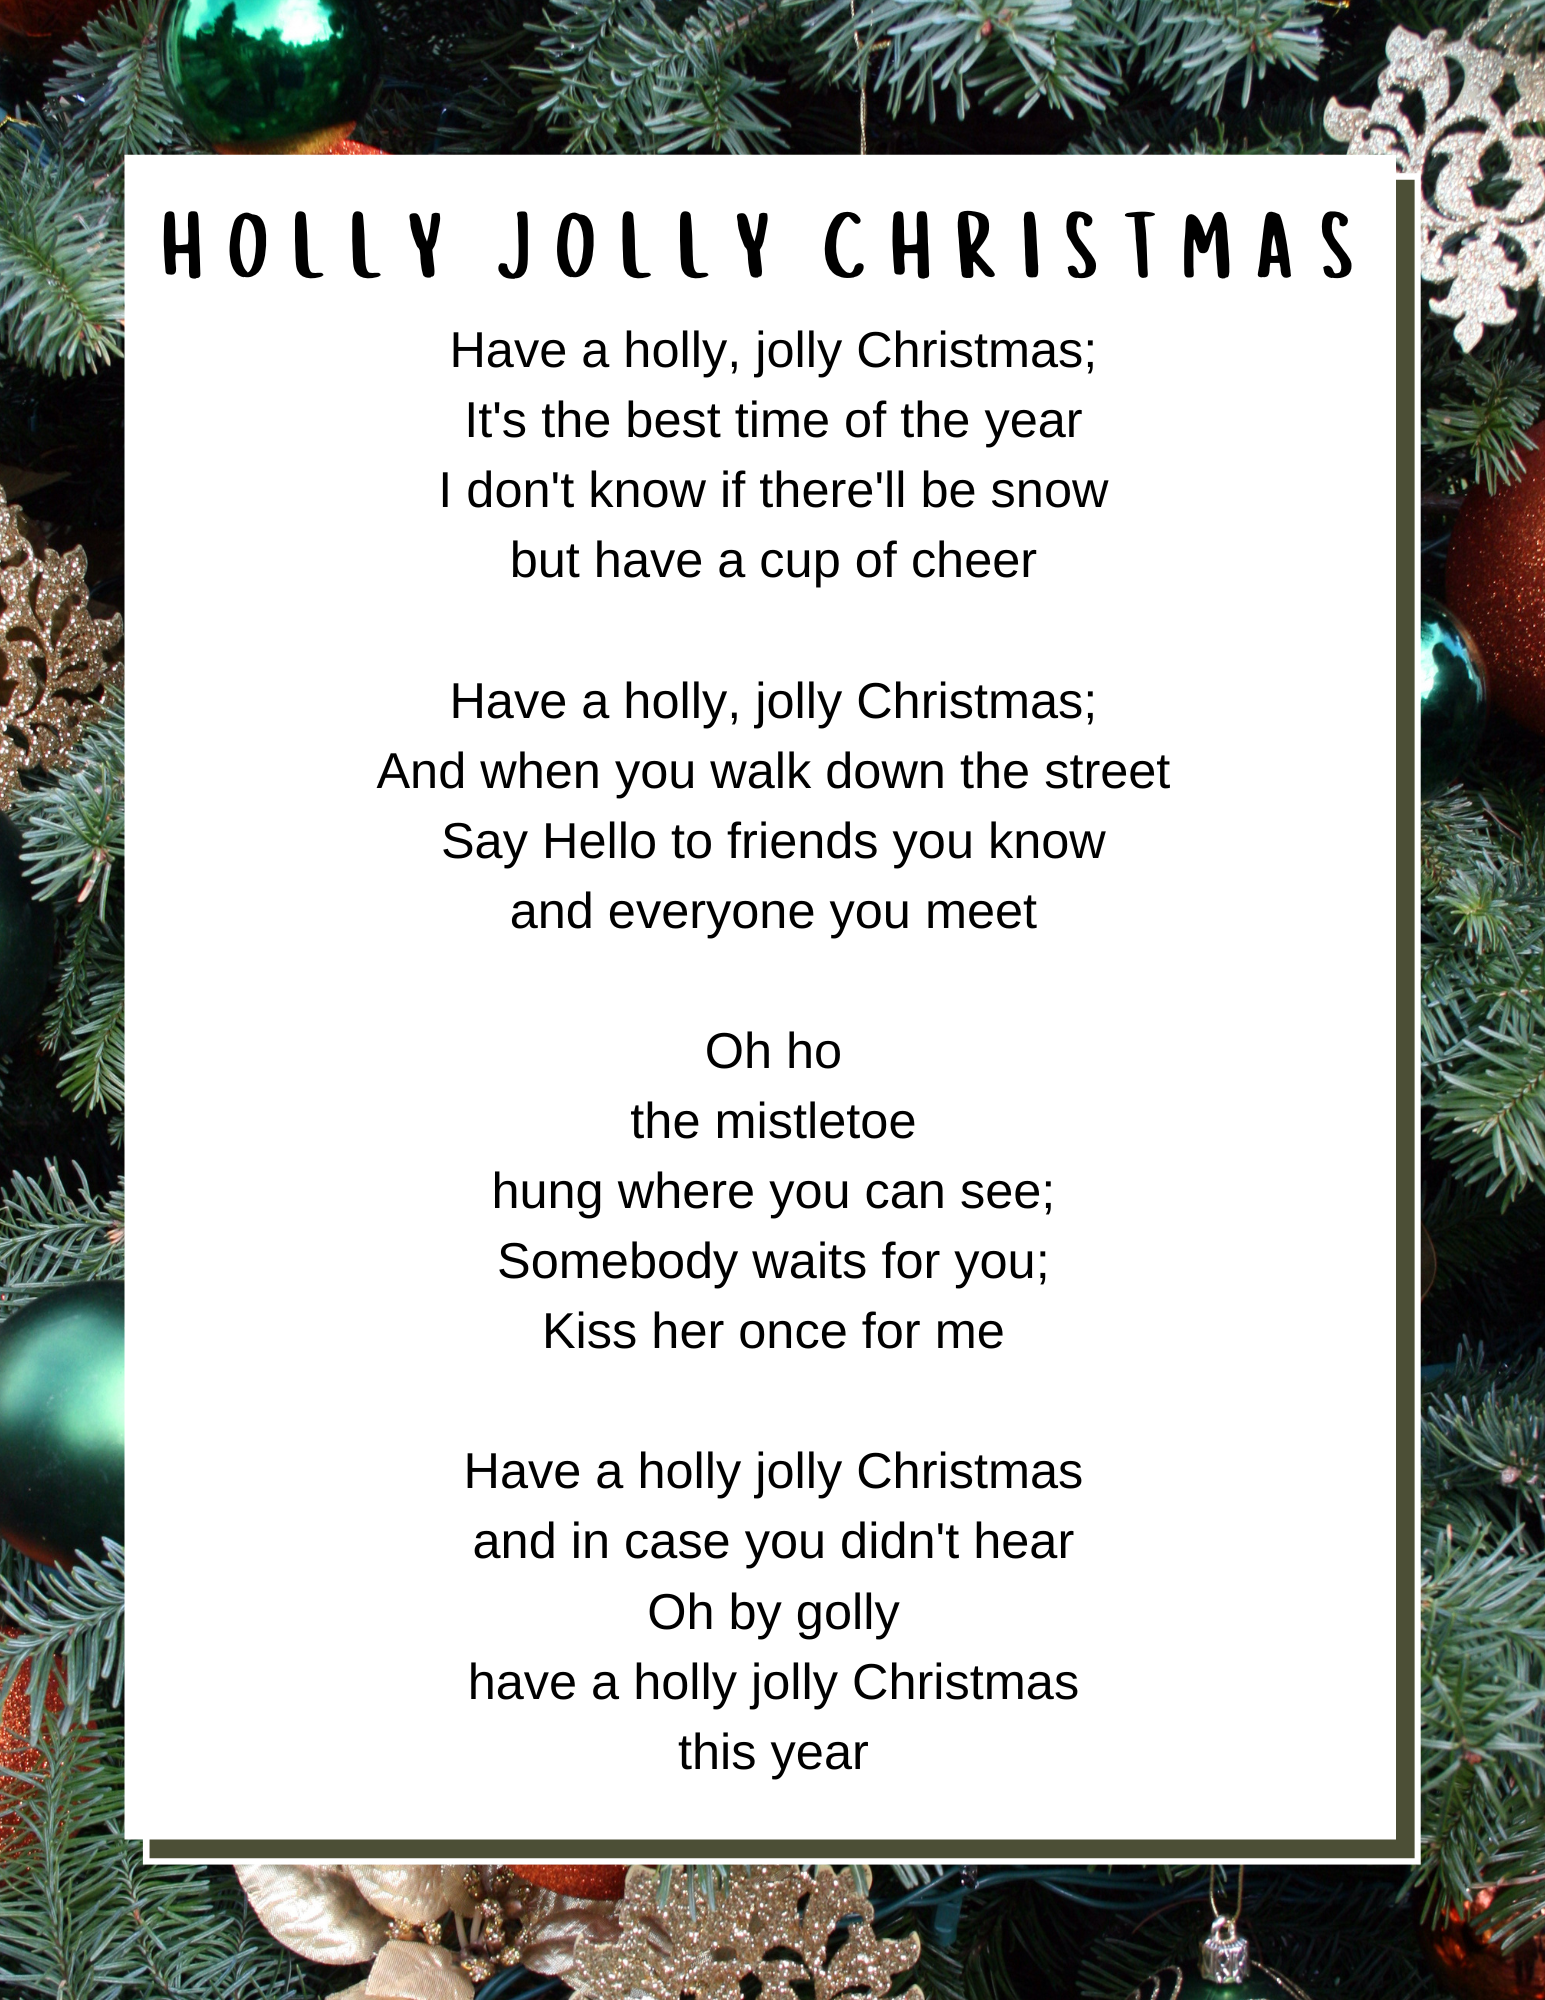 The opening lyrics to my favorite Christmas song